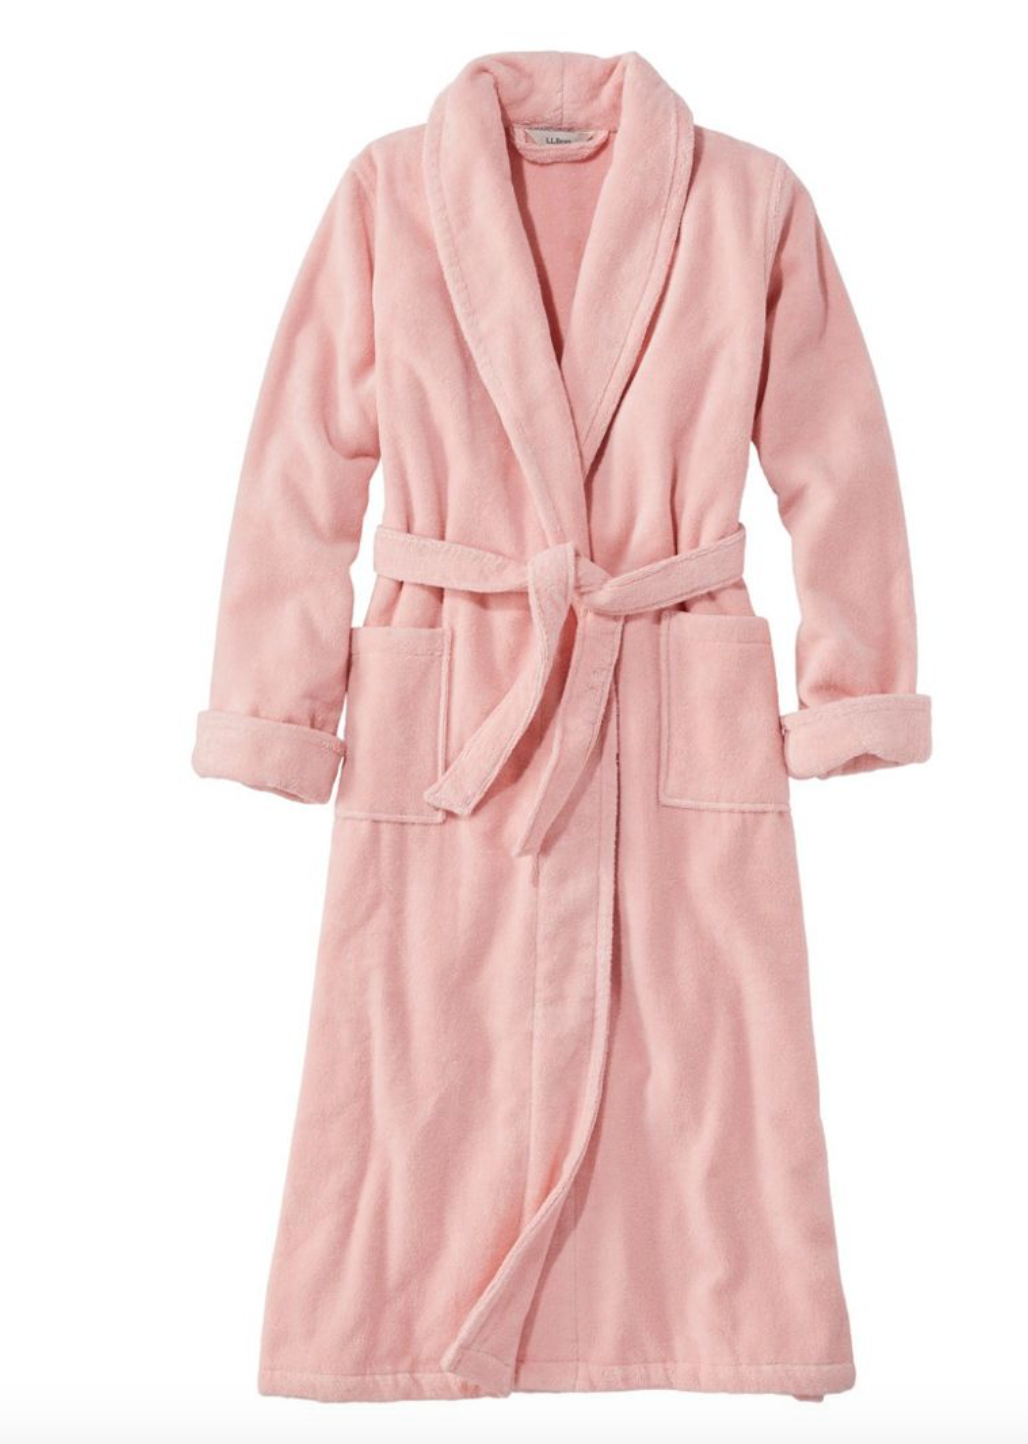 Pink terry cloth robe